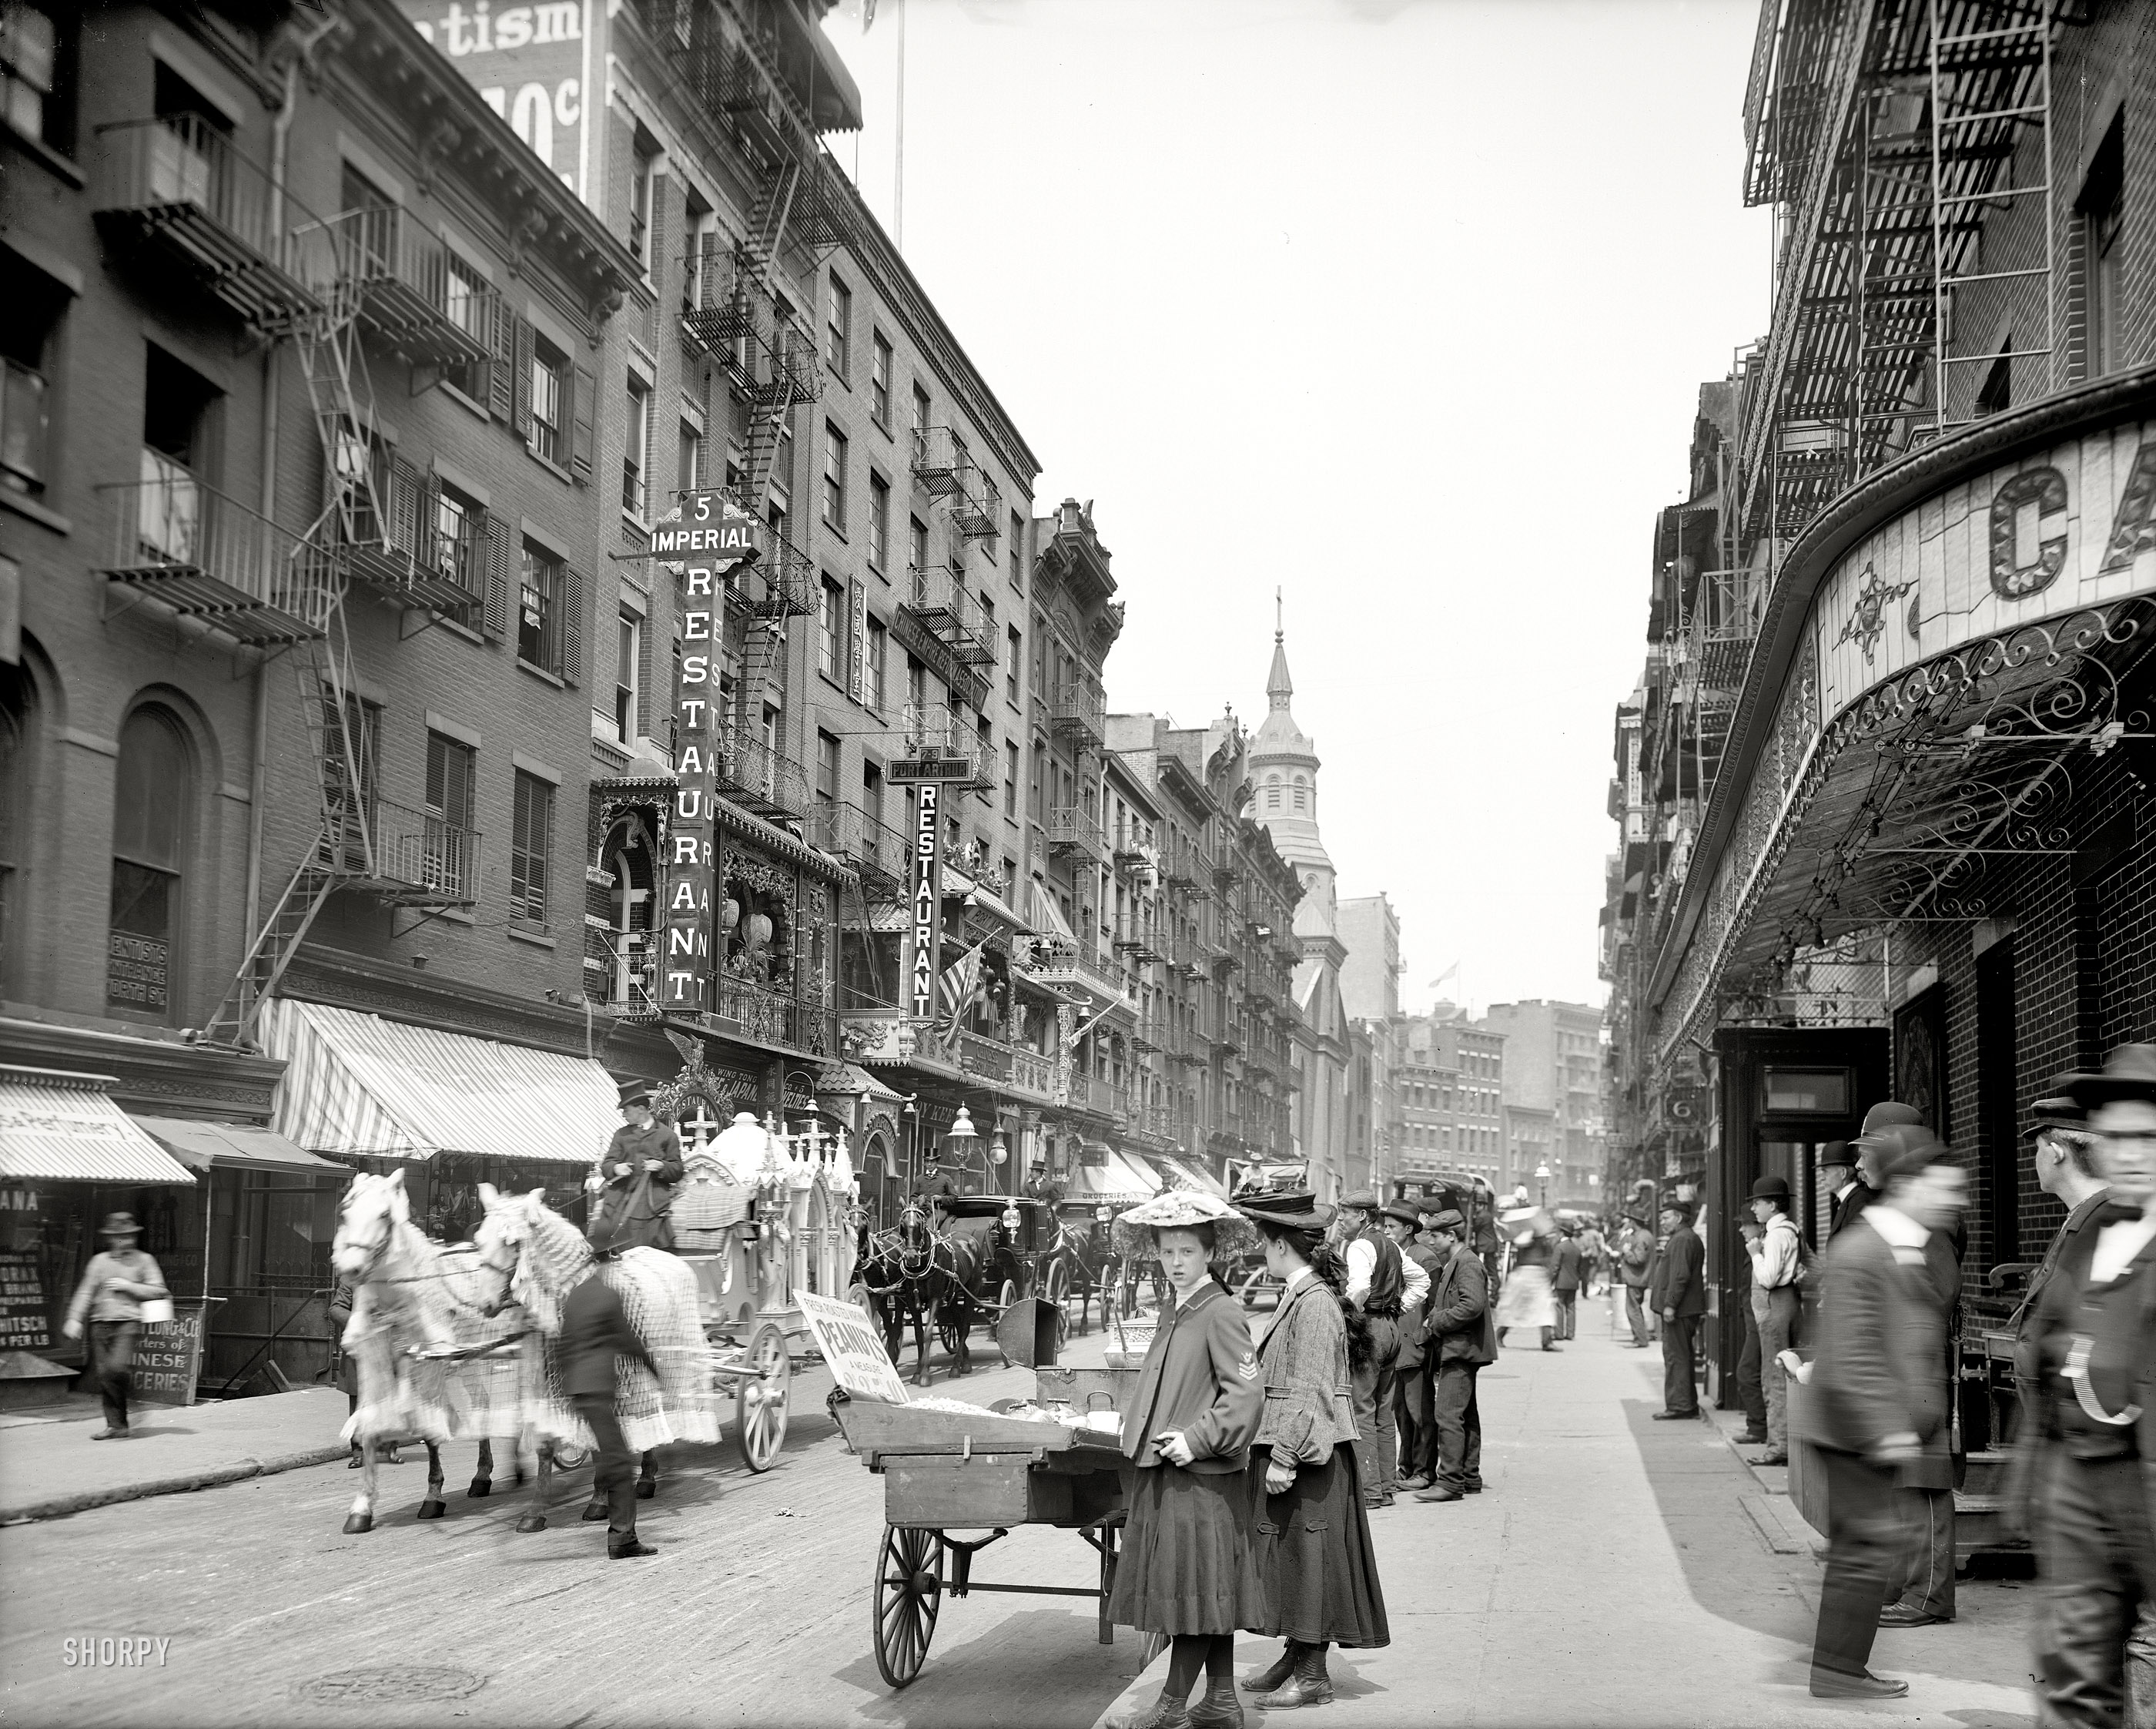 New York circa 1905. "Mott Street." Another view of the funeral procession seen here. 8x10 inch dry plate glass negative, Detroit Publishing Co. View full size.